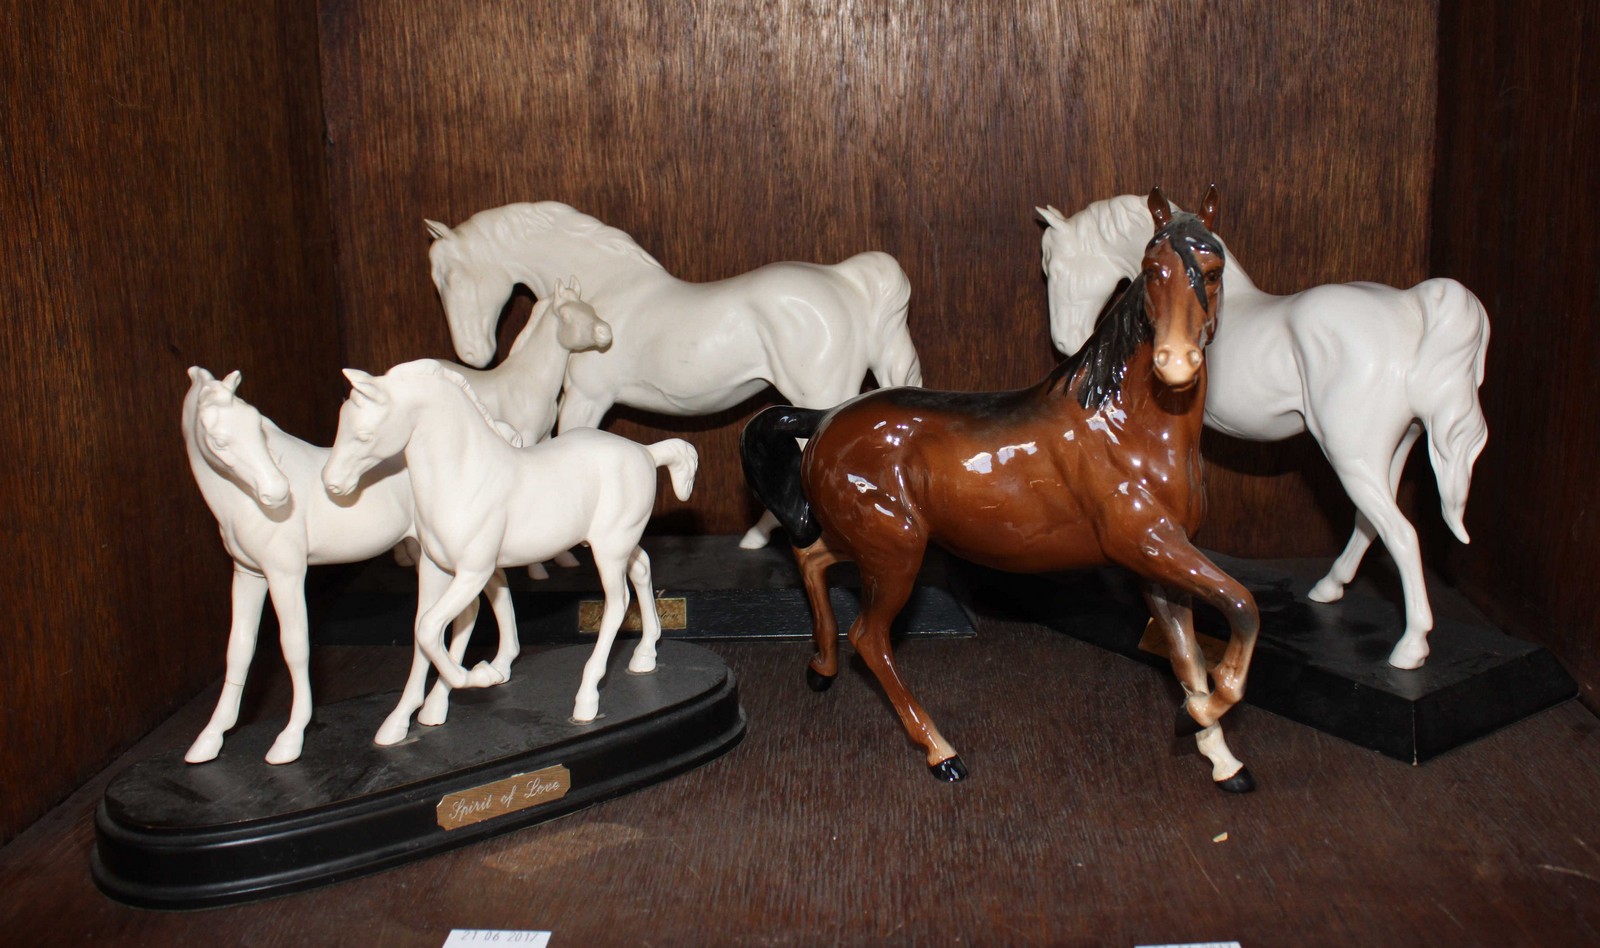 SECTION 33. Three Royal Doulton white horse figure-groups together with a Beswick ceramic horse, (